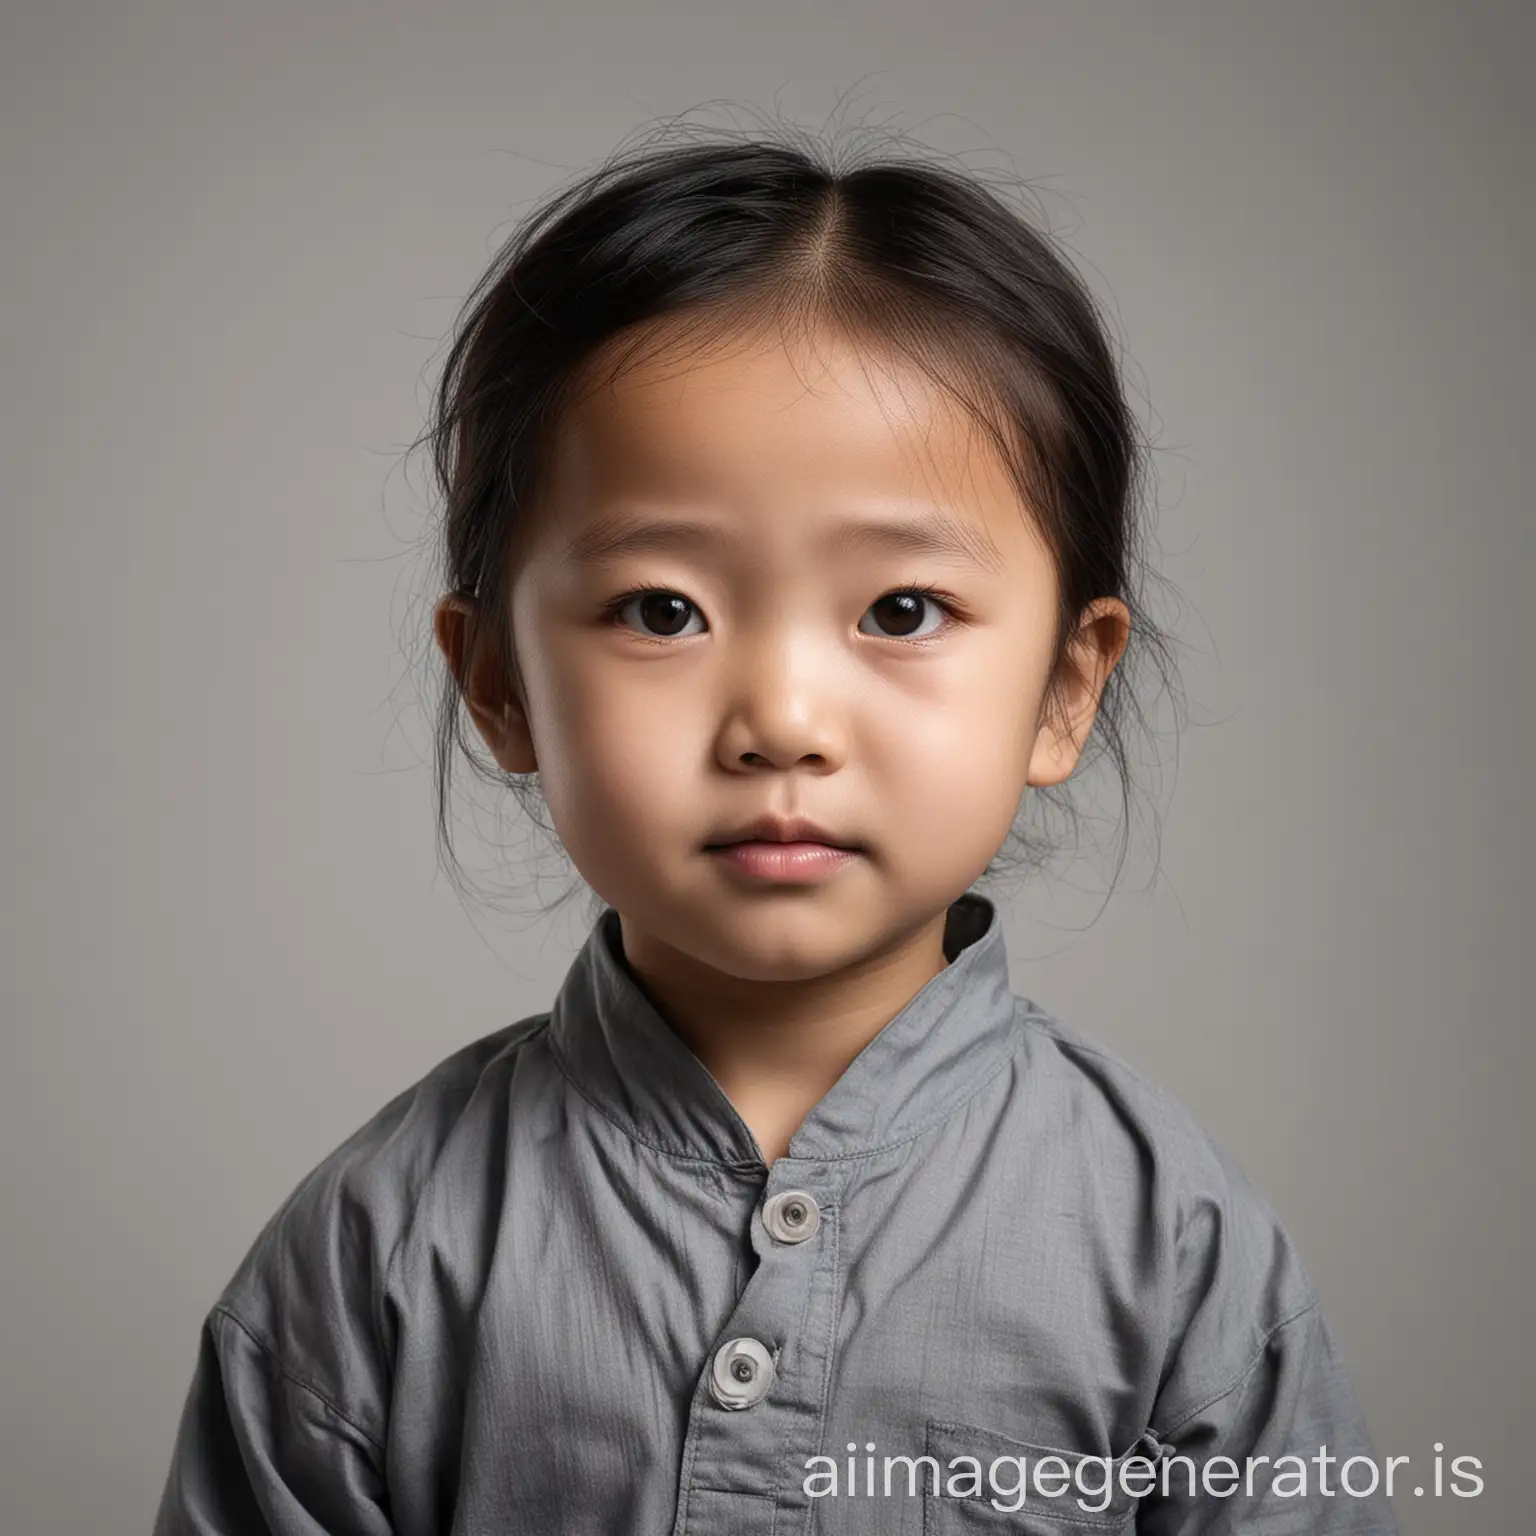 single person Asian child dark clothing white background ID photo even face brightness